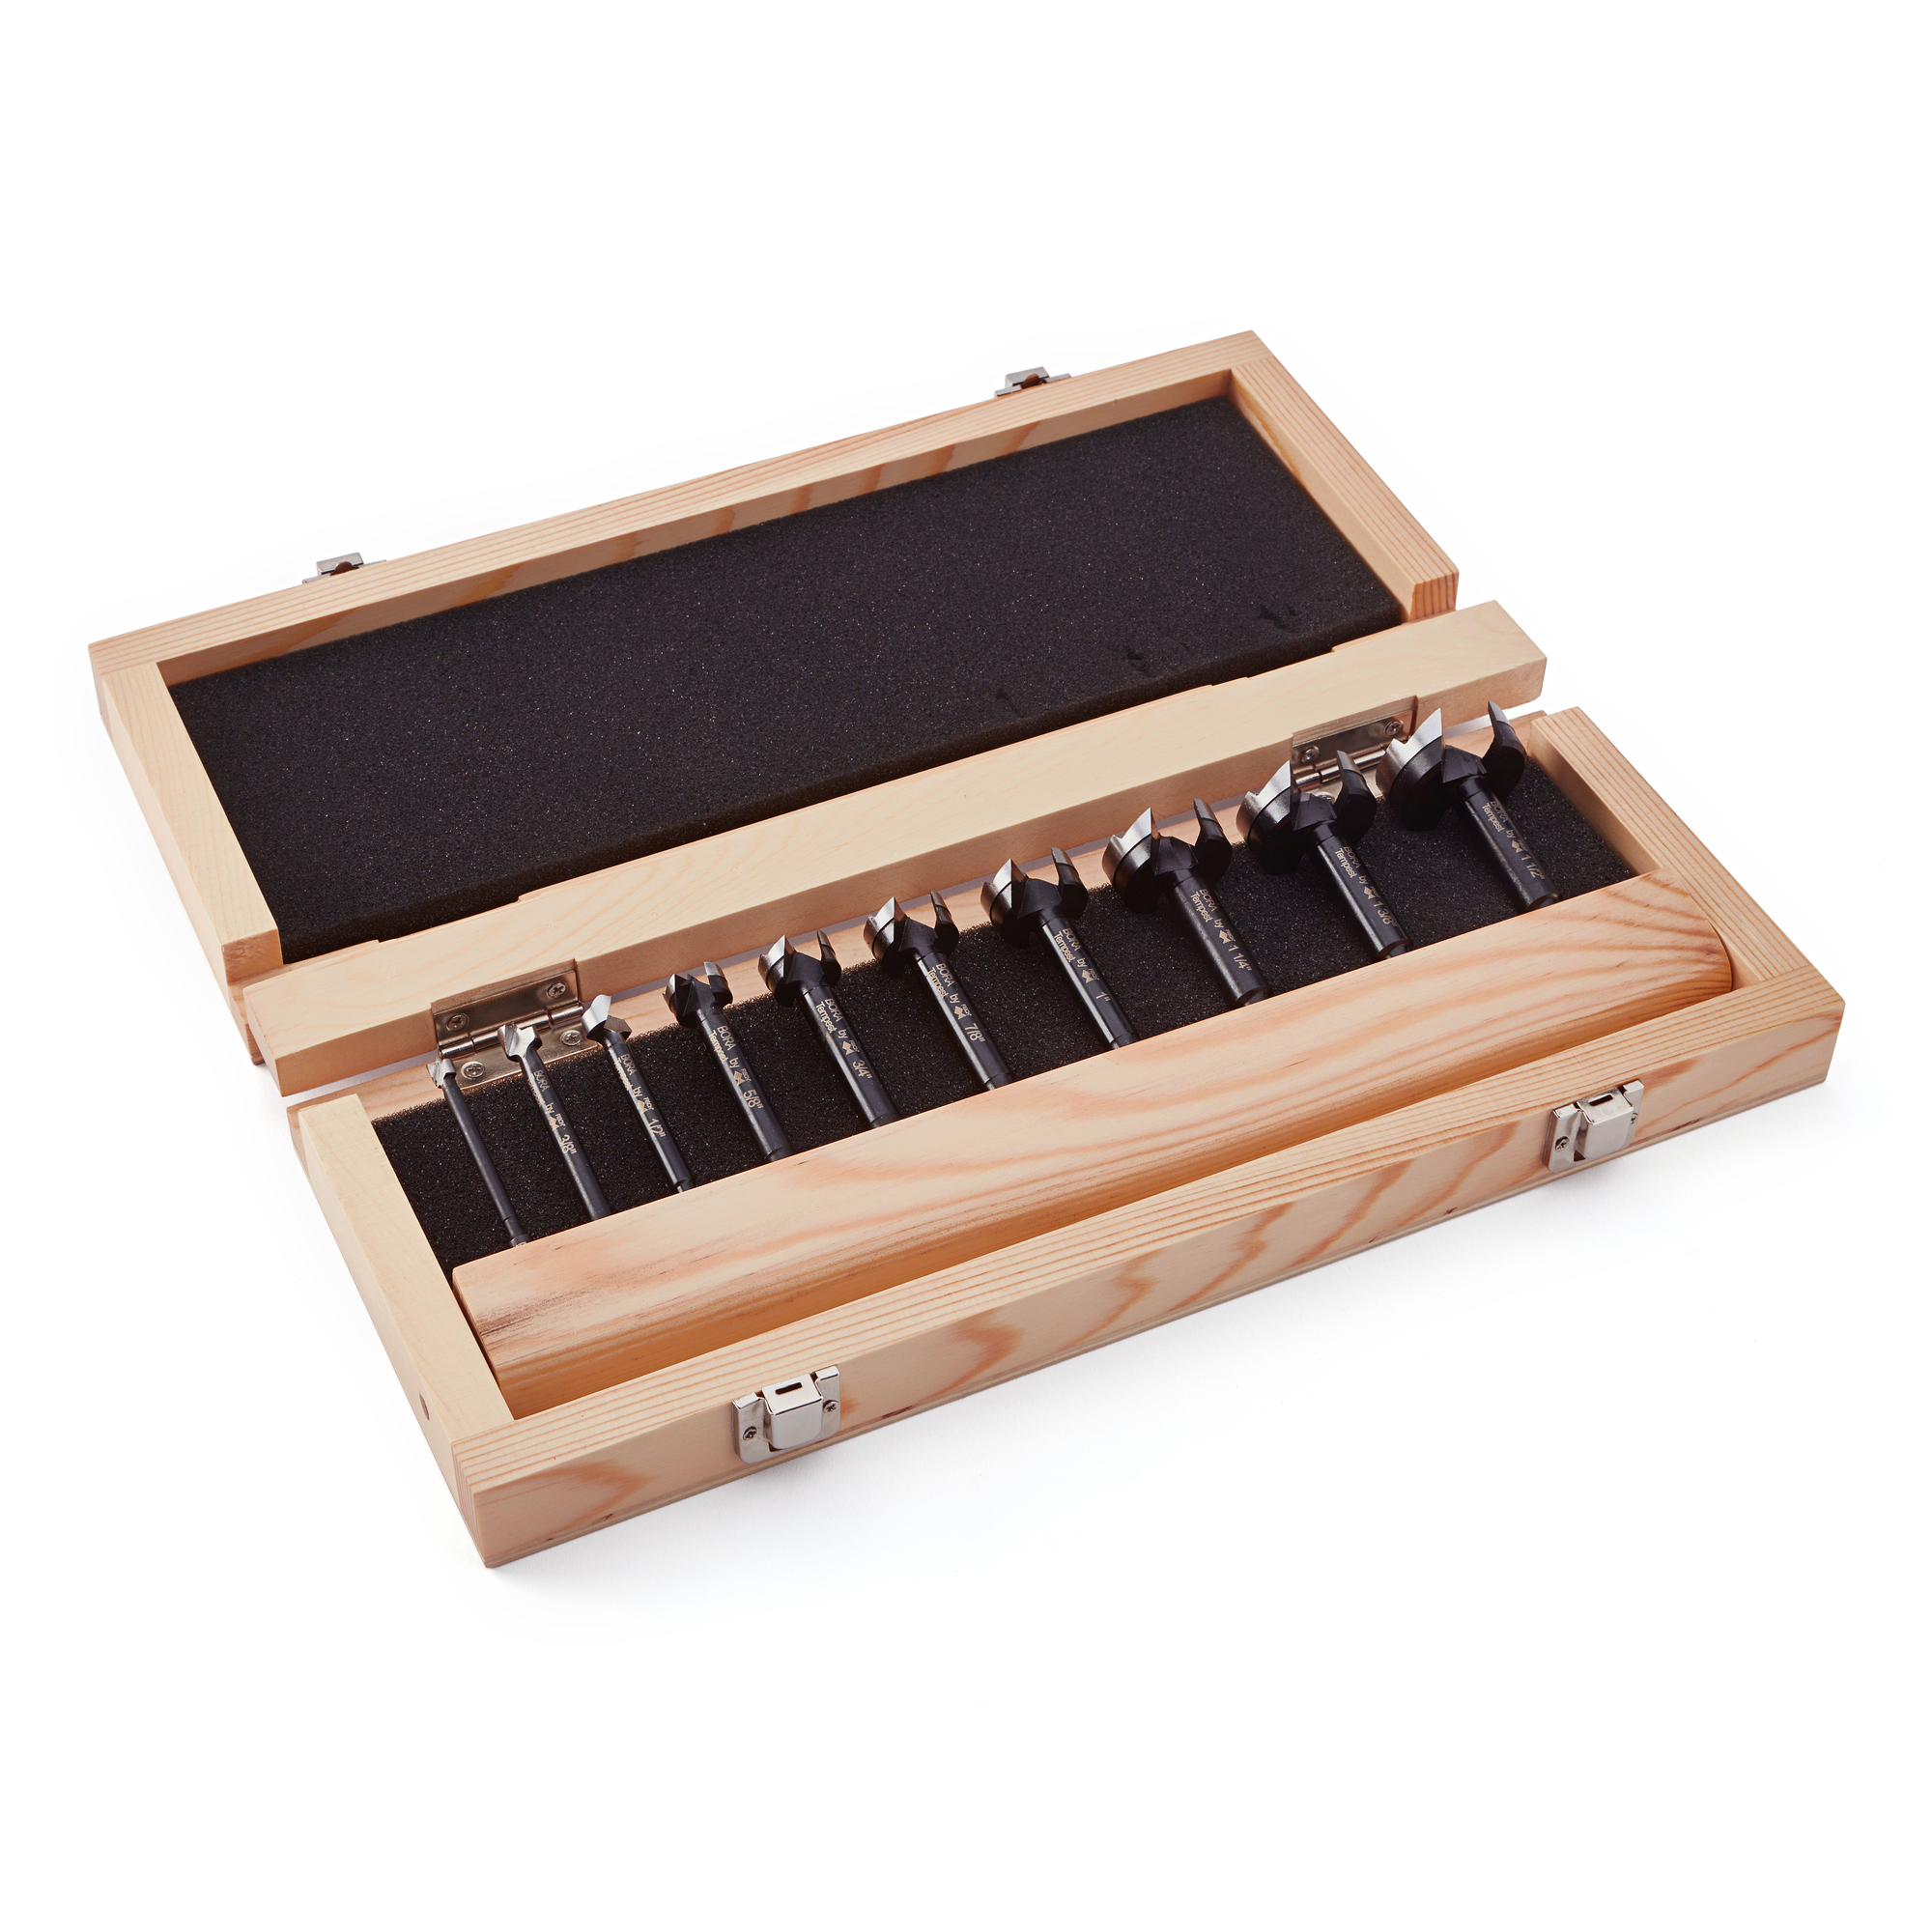 BORA, Tempest Forstner Bit: 10 Pc Set in Wood Box, Included (qty.) 1 Model BFB-009874